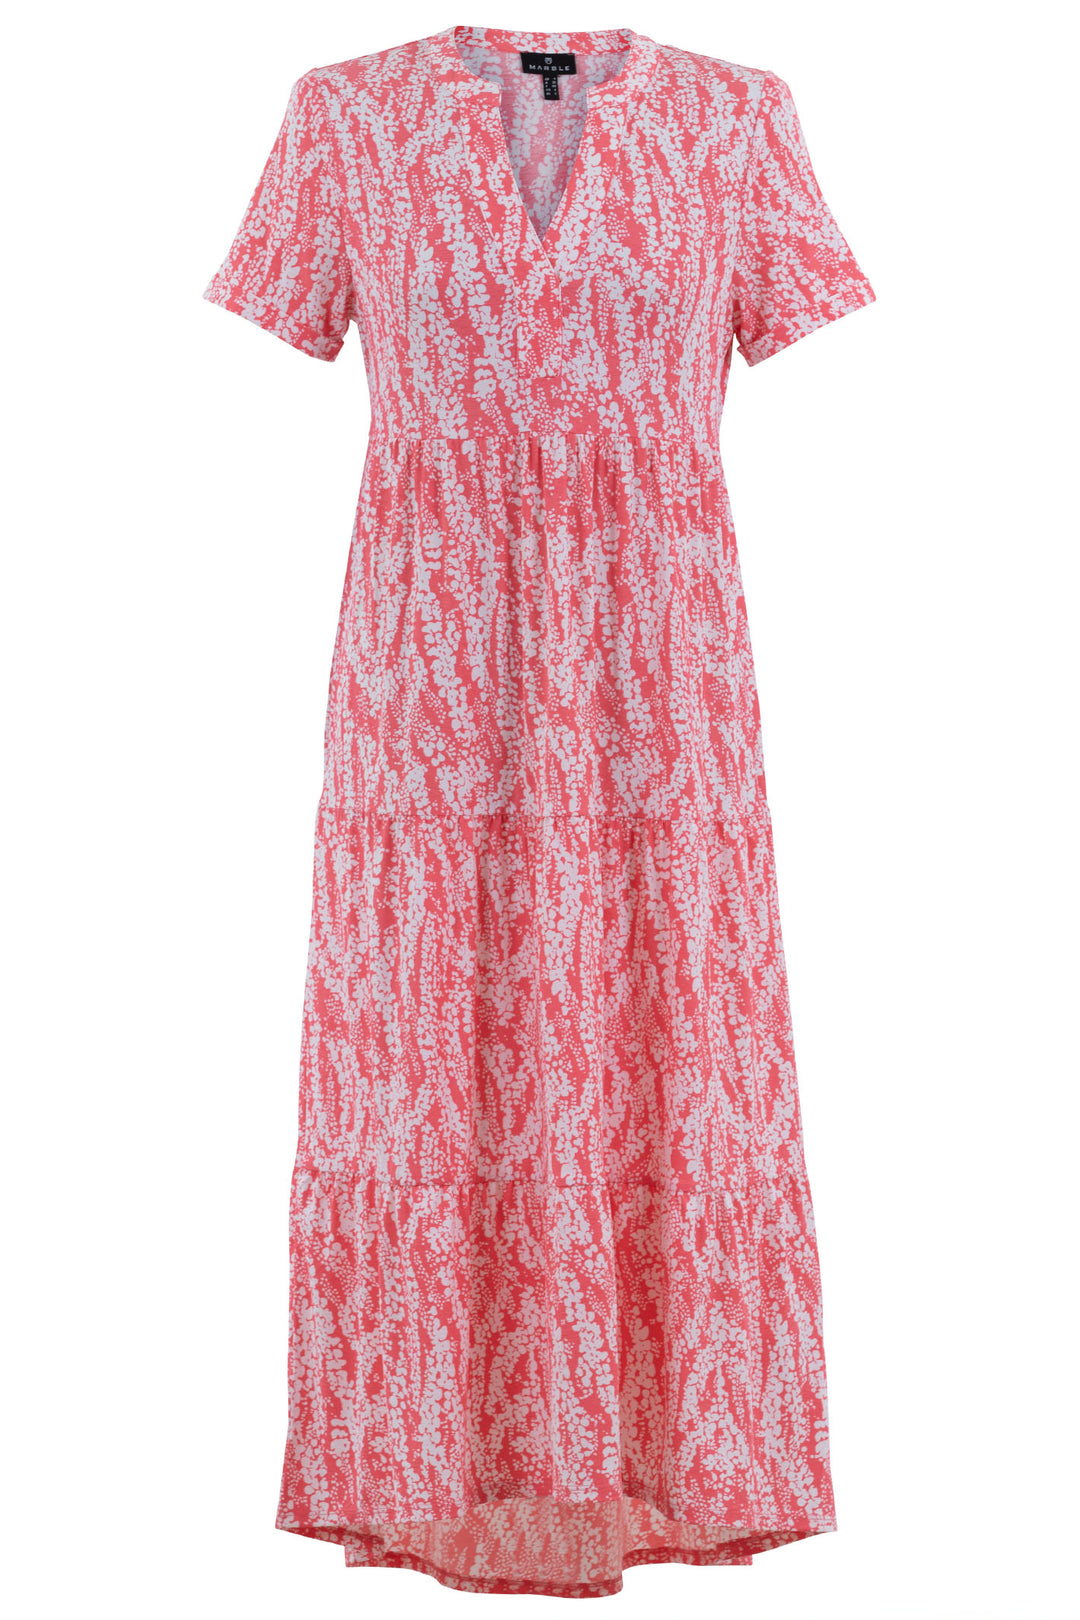 Marble Fashions 7397 135 Pink Print Short Sleeve A-Line Dress - Experience Boutique